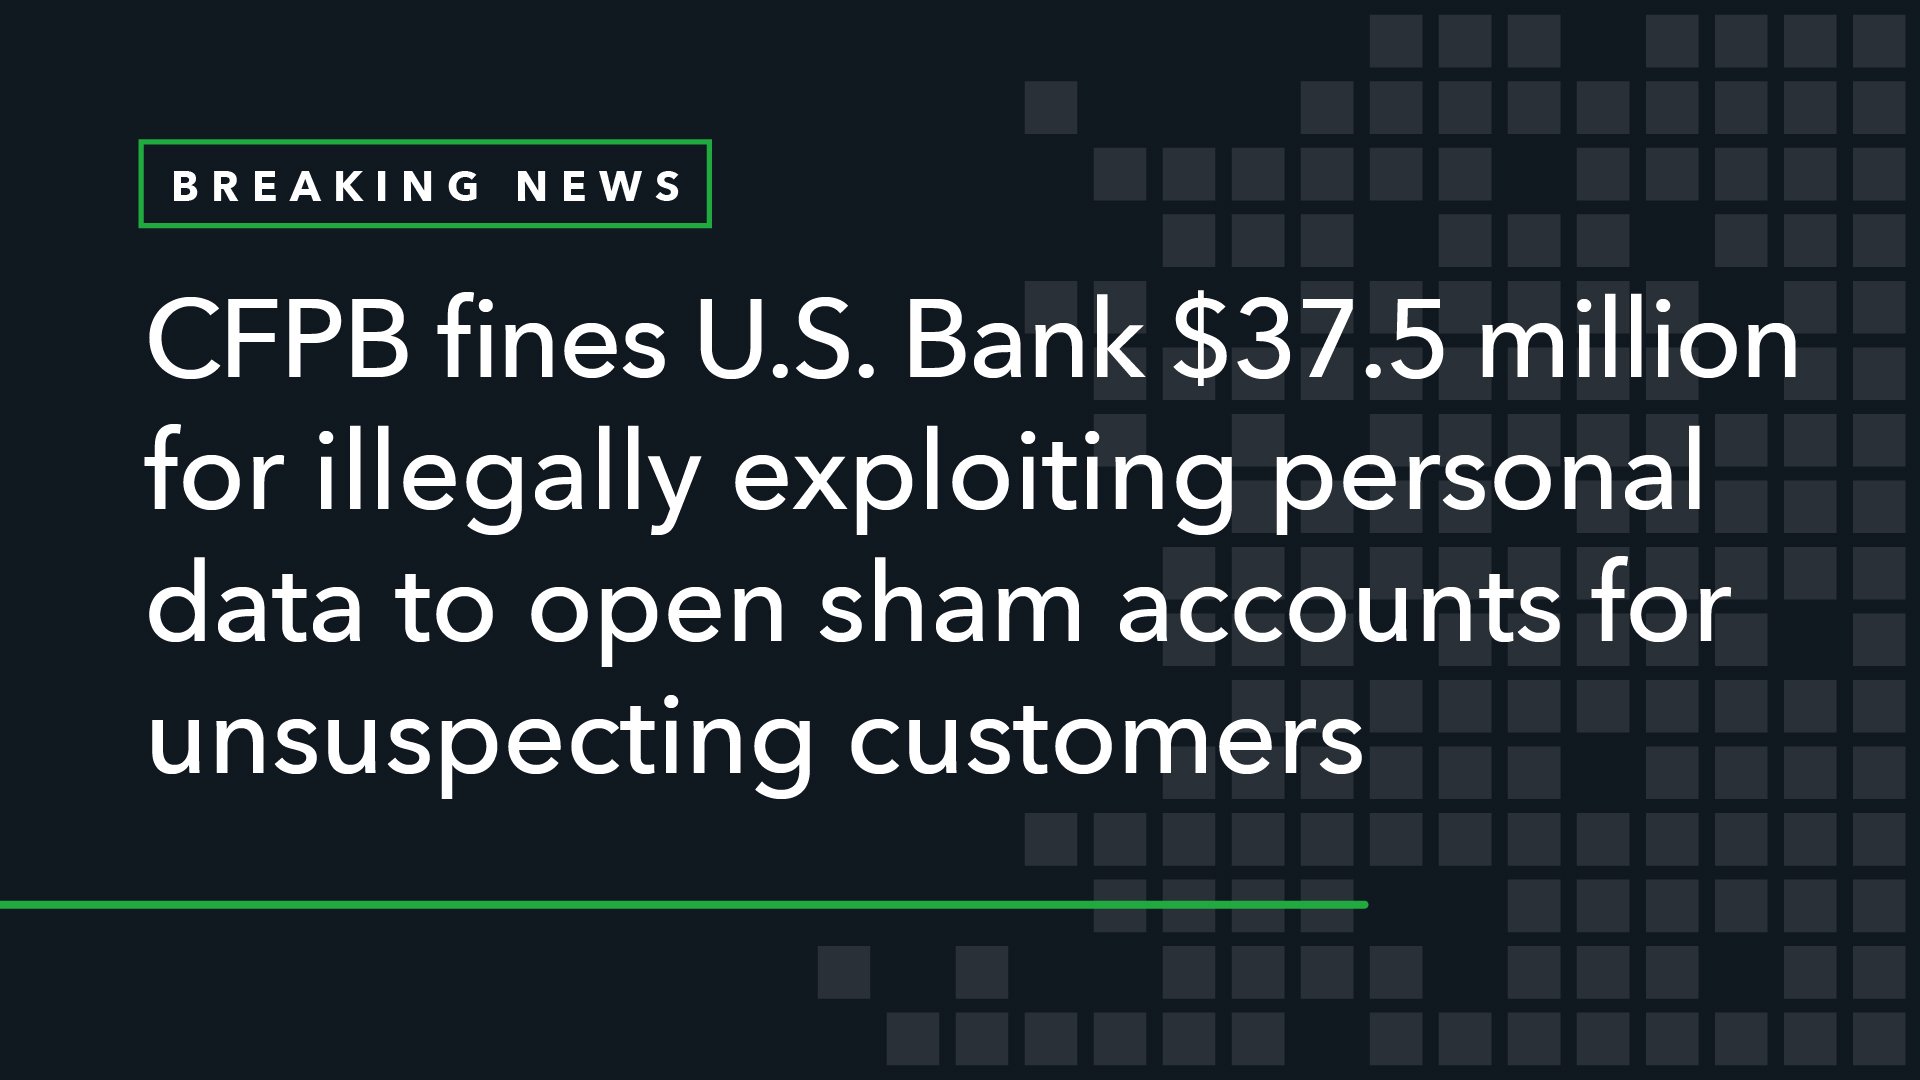 CFPB Fines U.S. Bank .5 Million for Illegally Exploiting Personal Data to Open Sham Accounts for Unsuspecting Customers